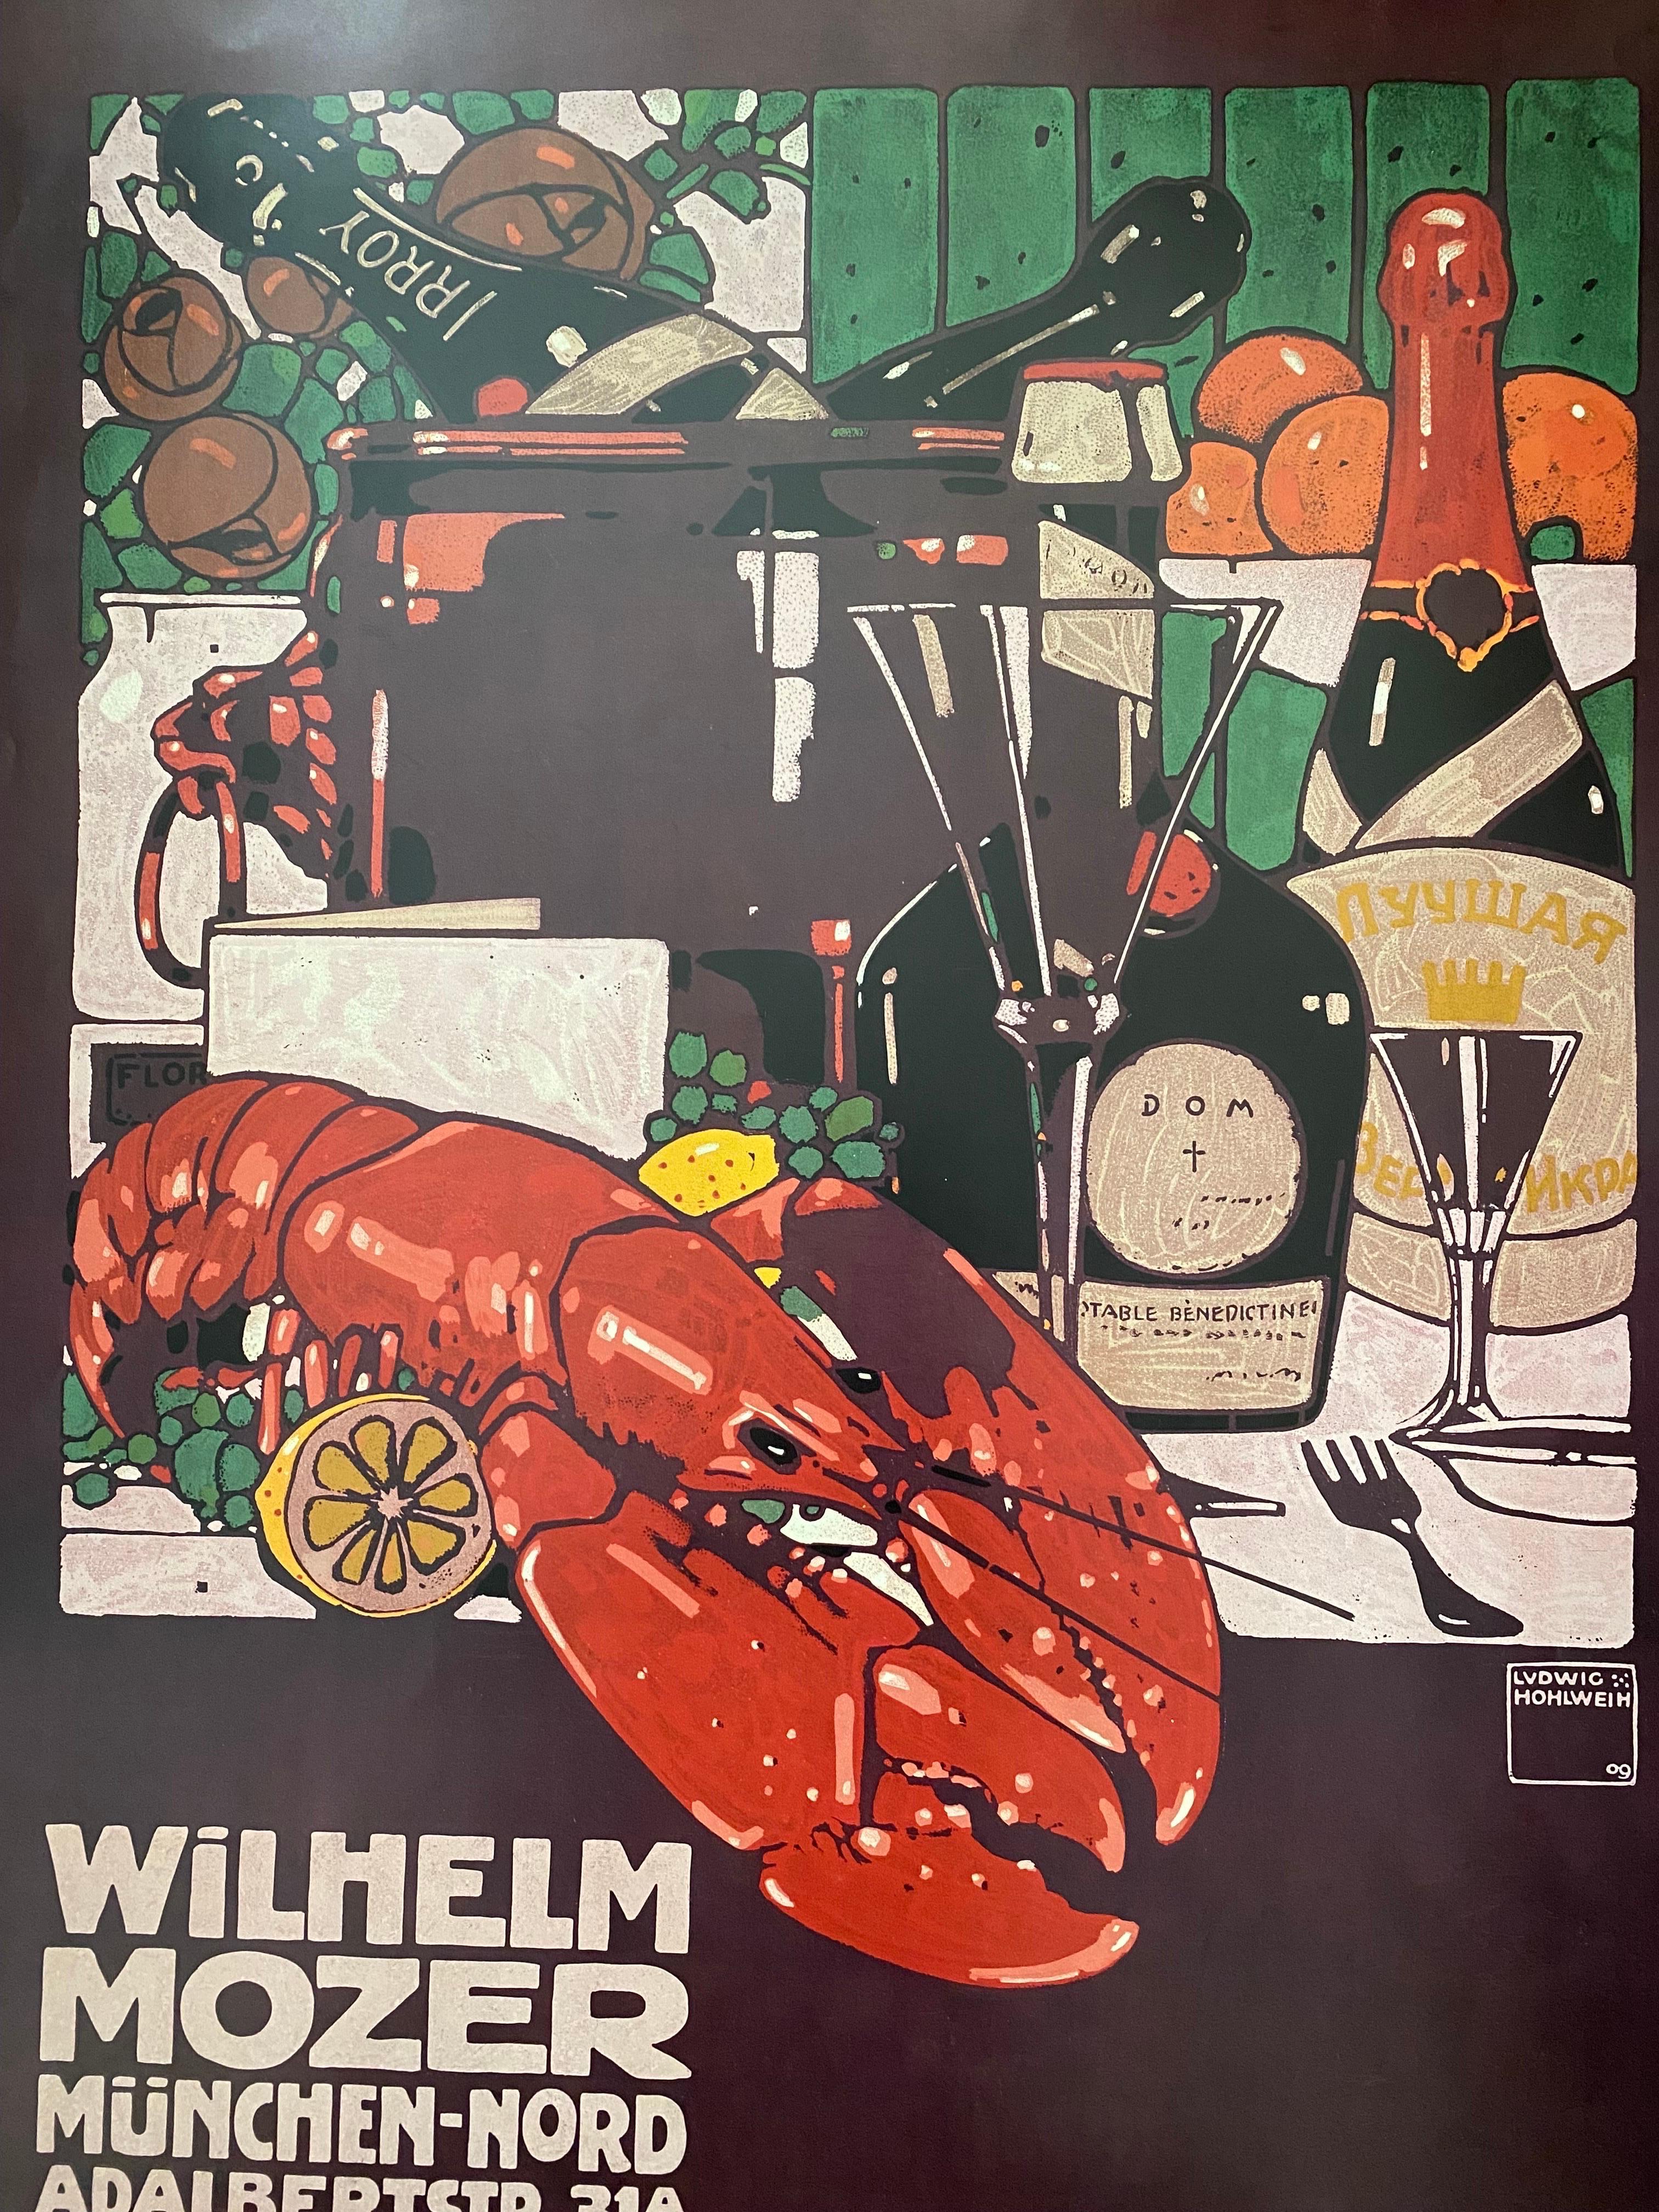 Beautiful print designed by German artist Ludwig Hohlwein. This advertisement poster for Wilhelm Mozer's delikatessen store in Munich was originally released in 1909. This is a 1985 reproduction for the Museum Of Modern Art (MOMA) in New York.

This